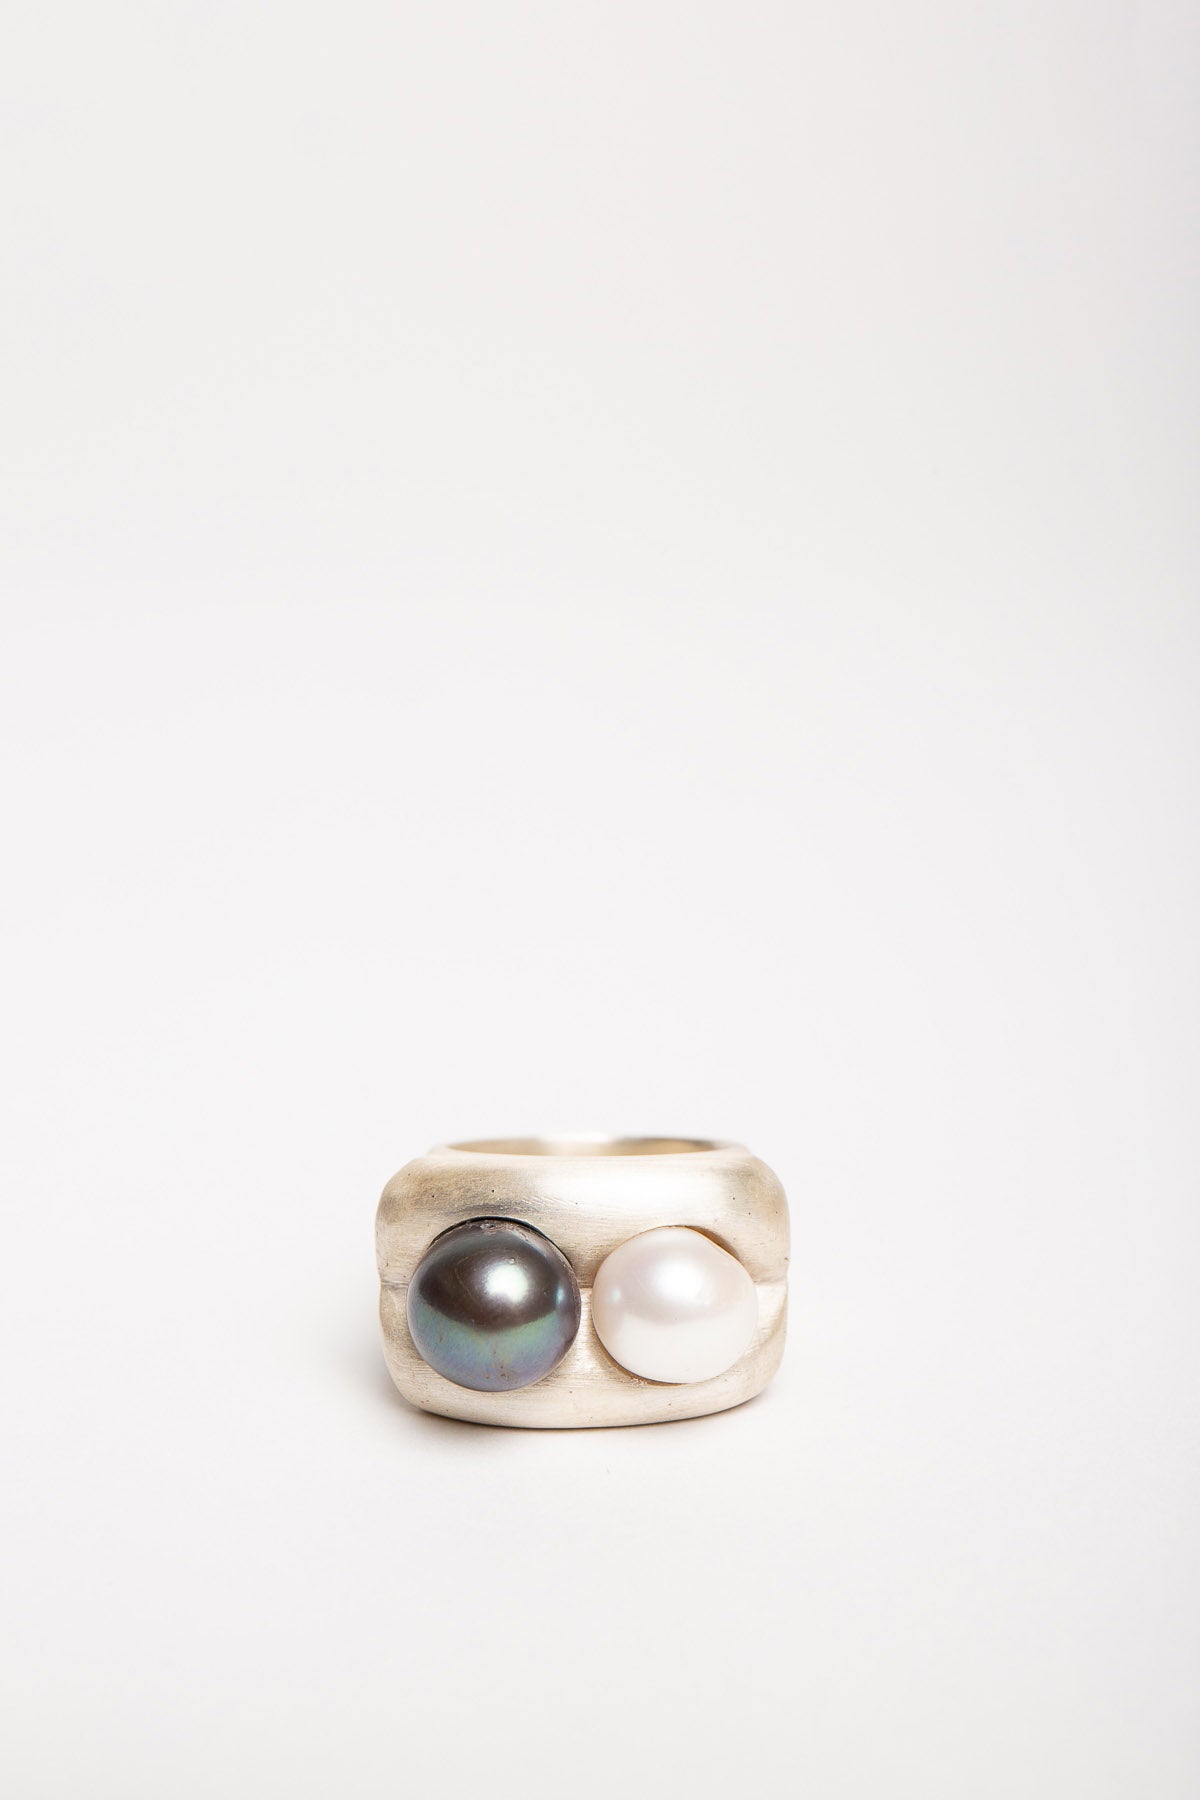 TRIN-KET | STERLING SILVER FRESH WATER PEARL RING